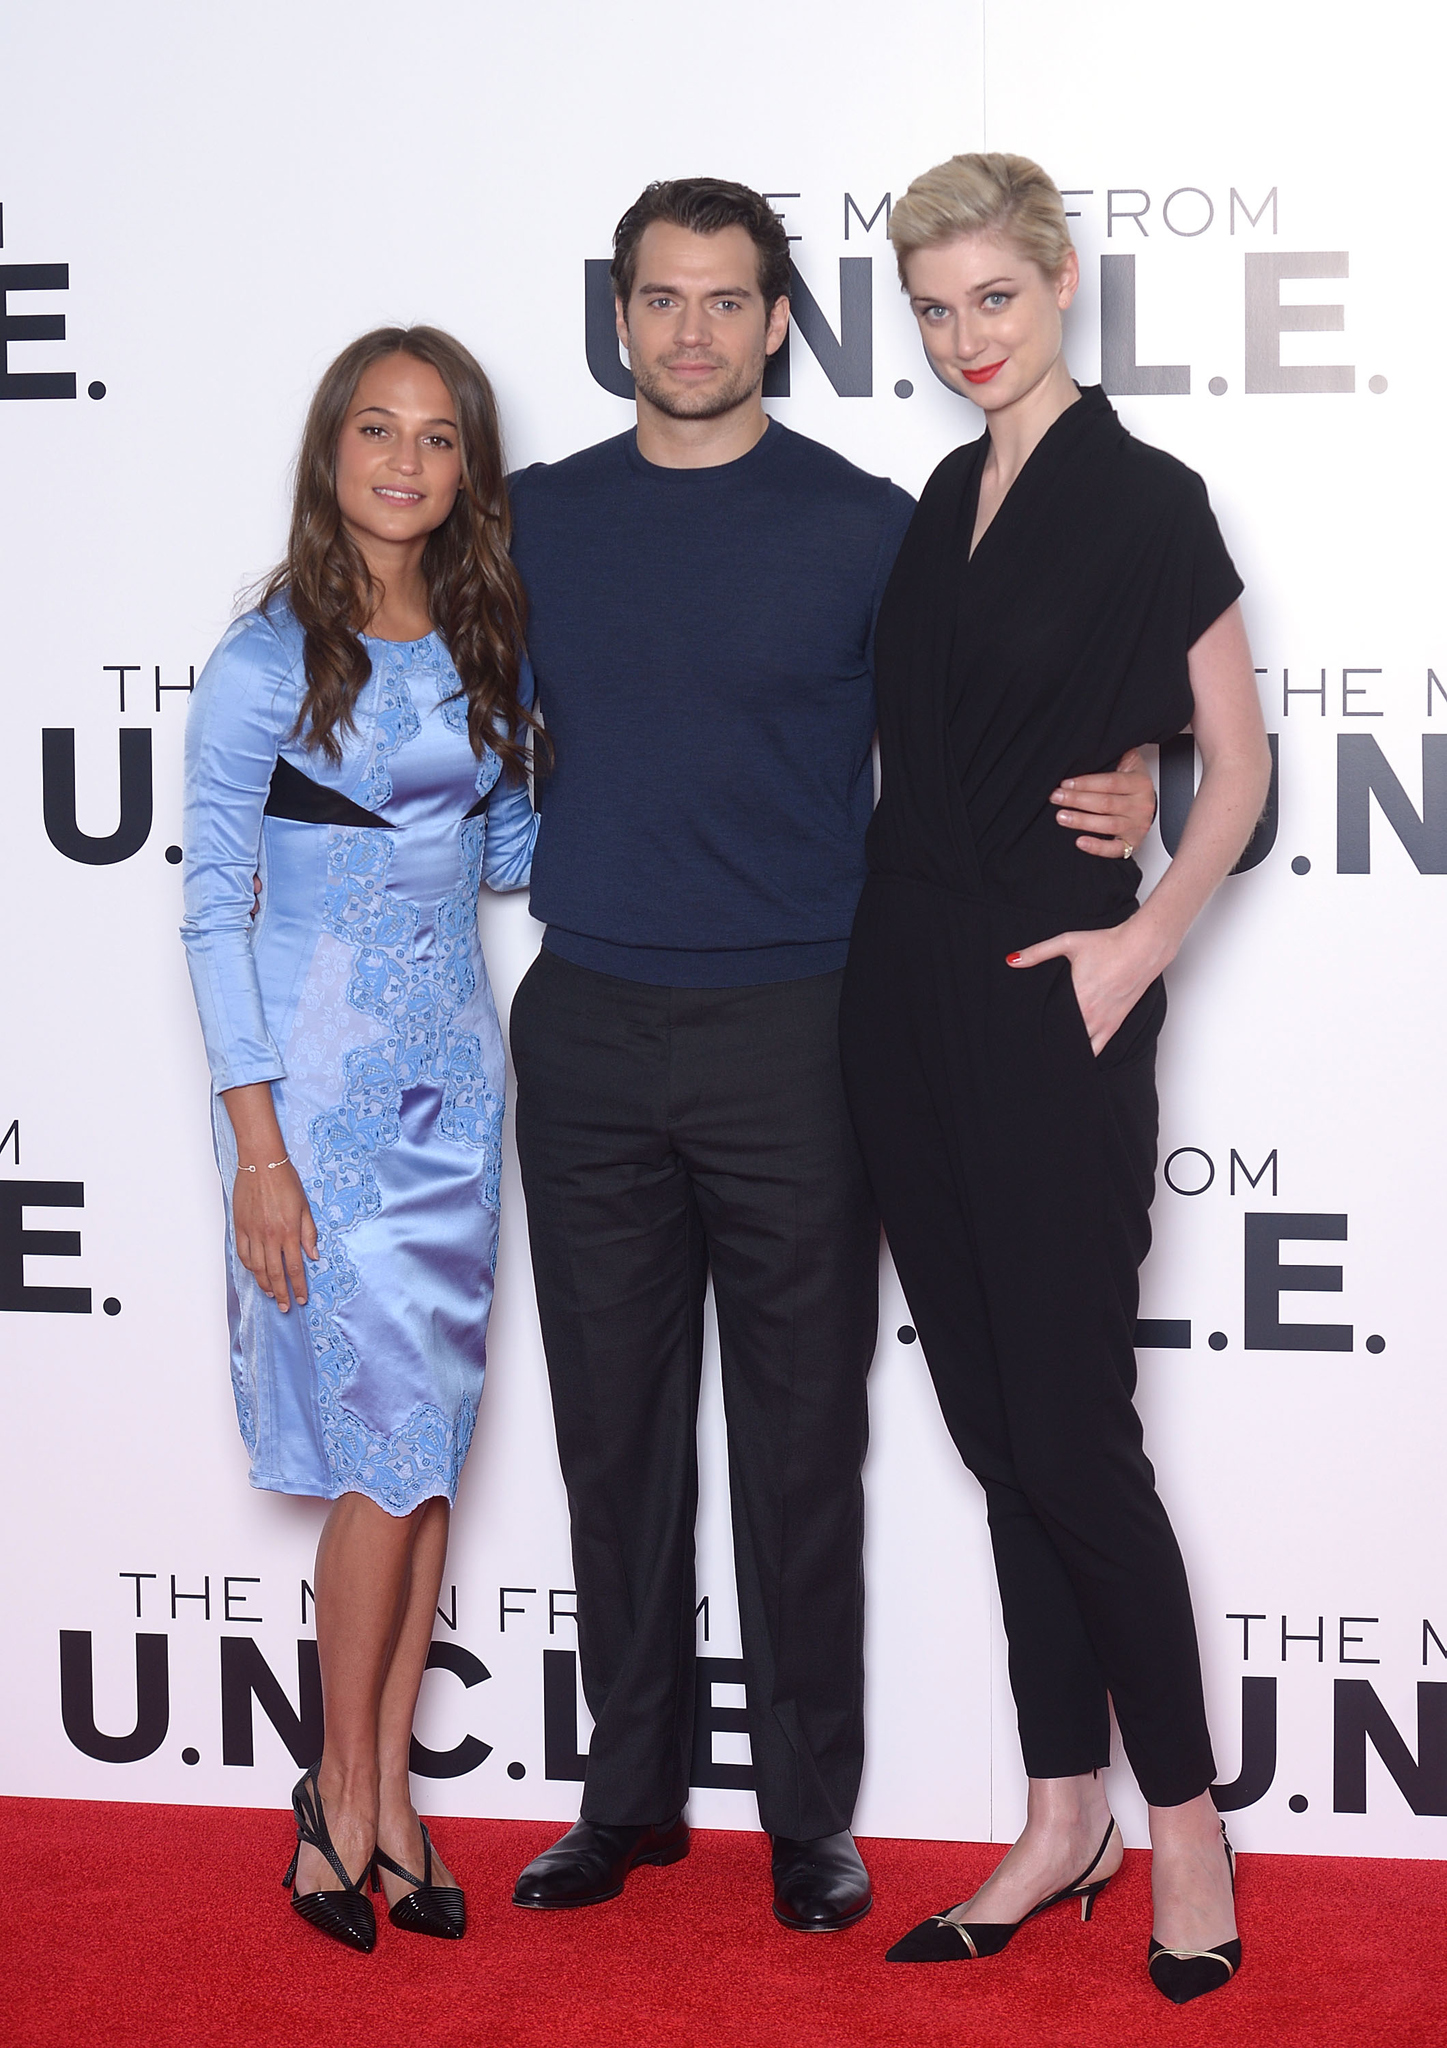 Henry Cavill, Alicia Vikander and Elizabeth Debicki at event of Snipas is U.N.C.L.E. (2015)